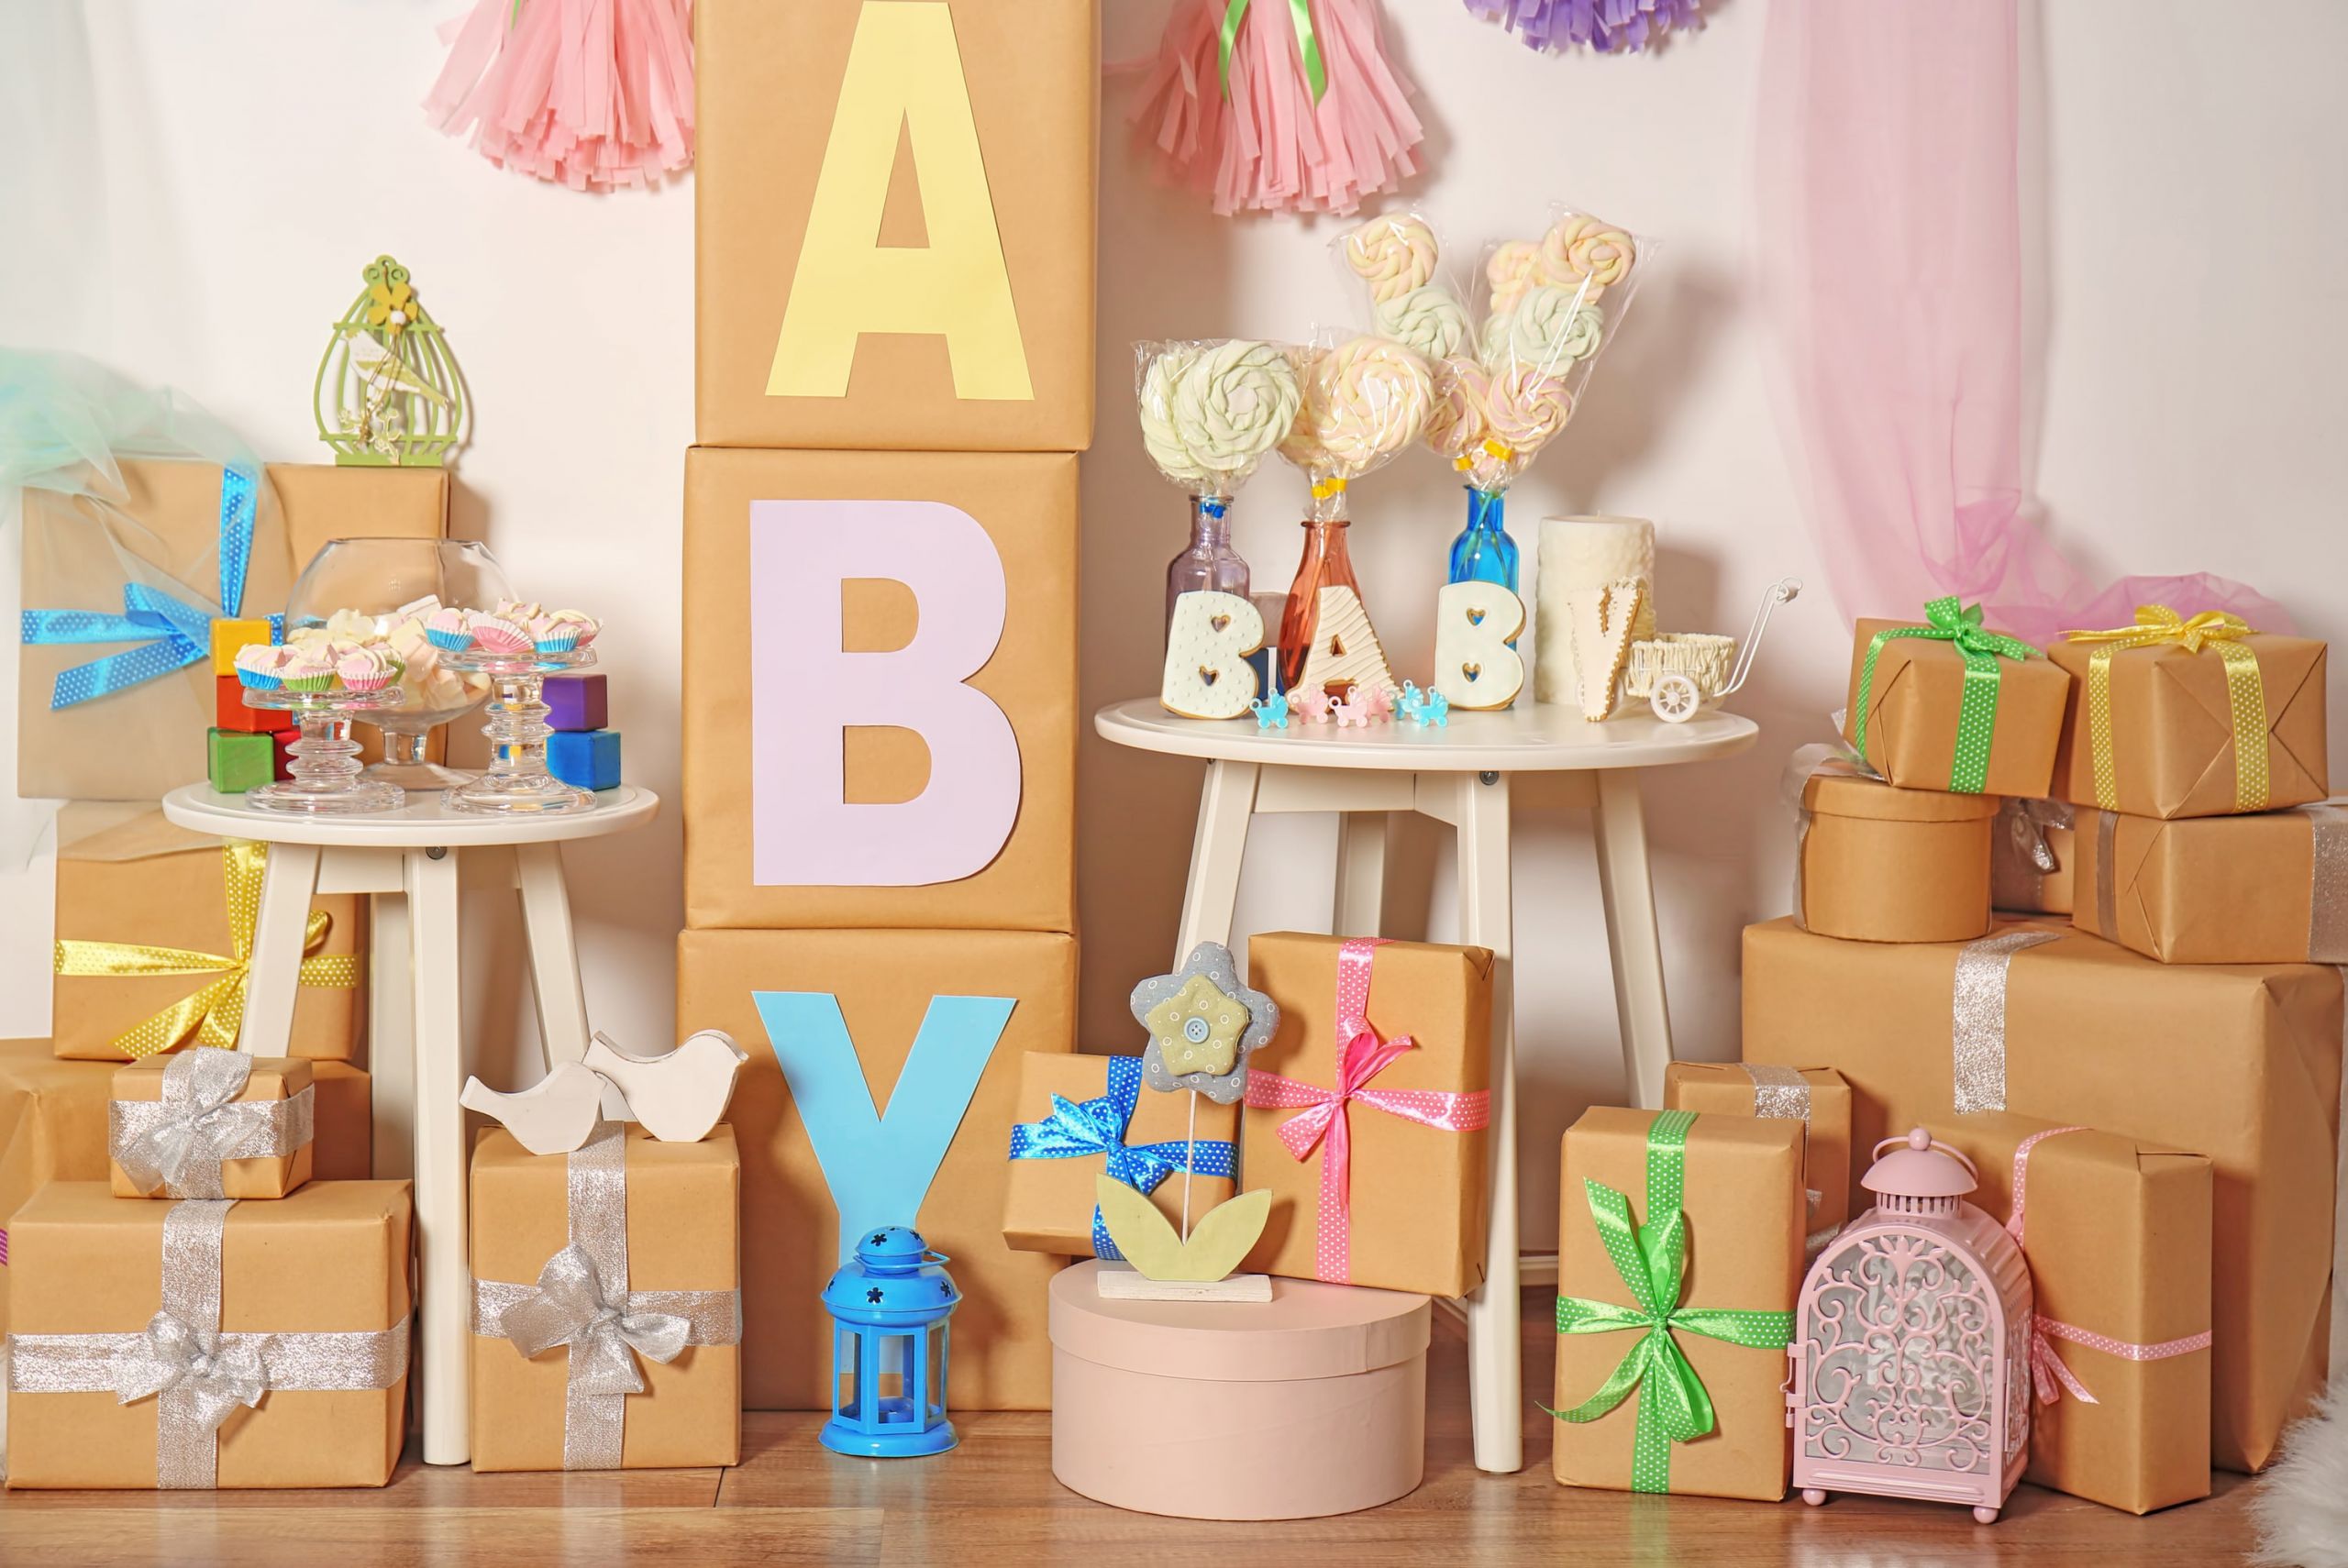 Girl Baby Shower Decorating Ideas
 5 Cheap & Unique Baby Shower Decoration Ideas